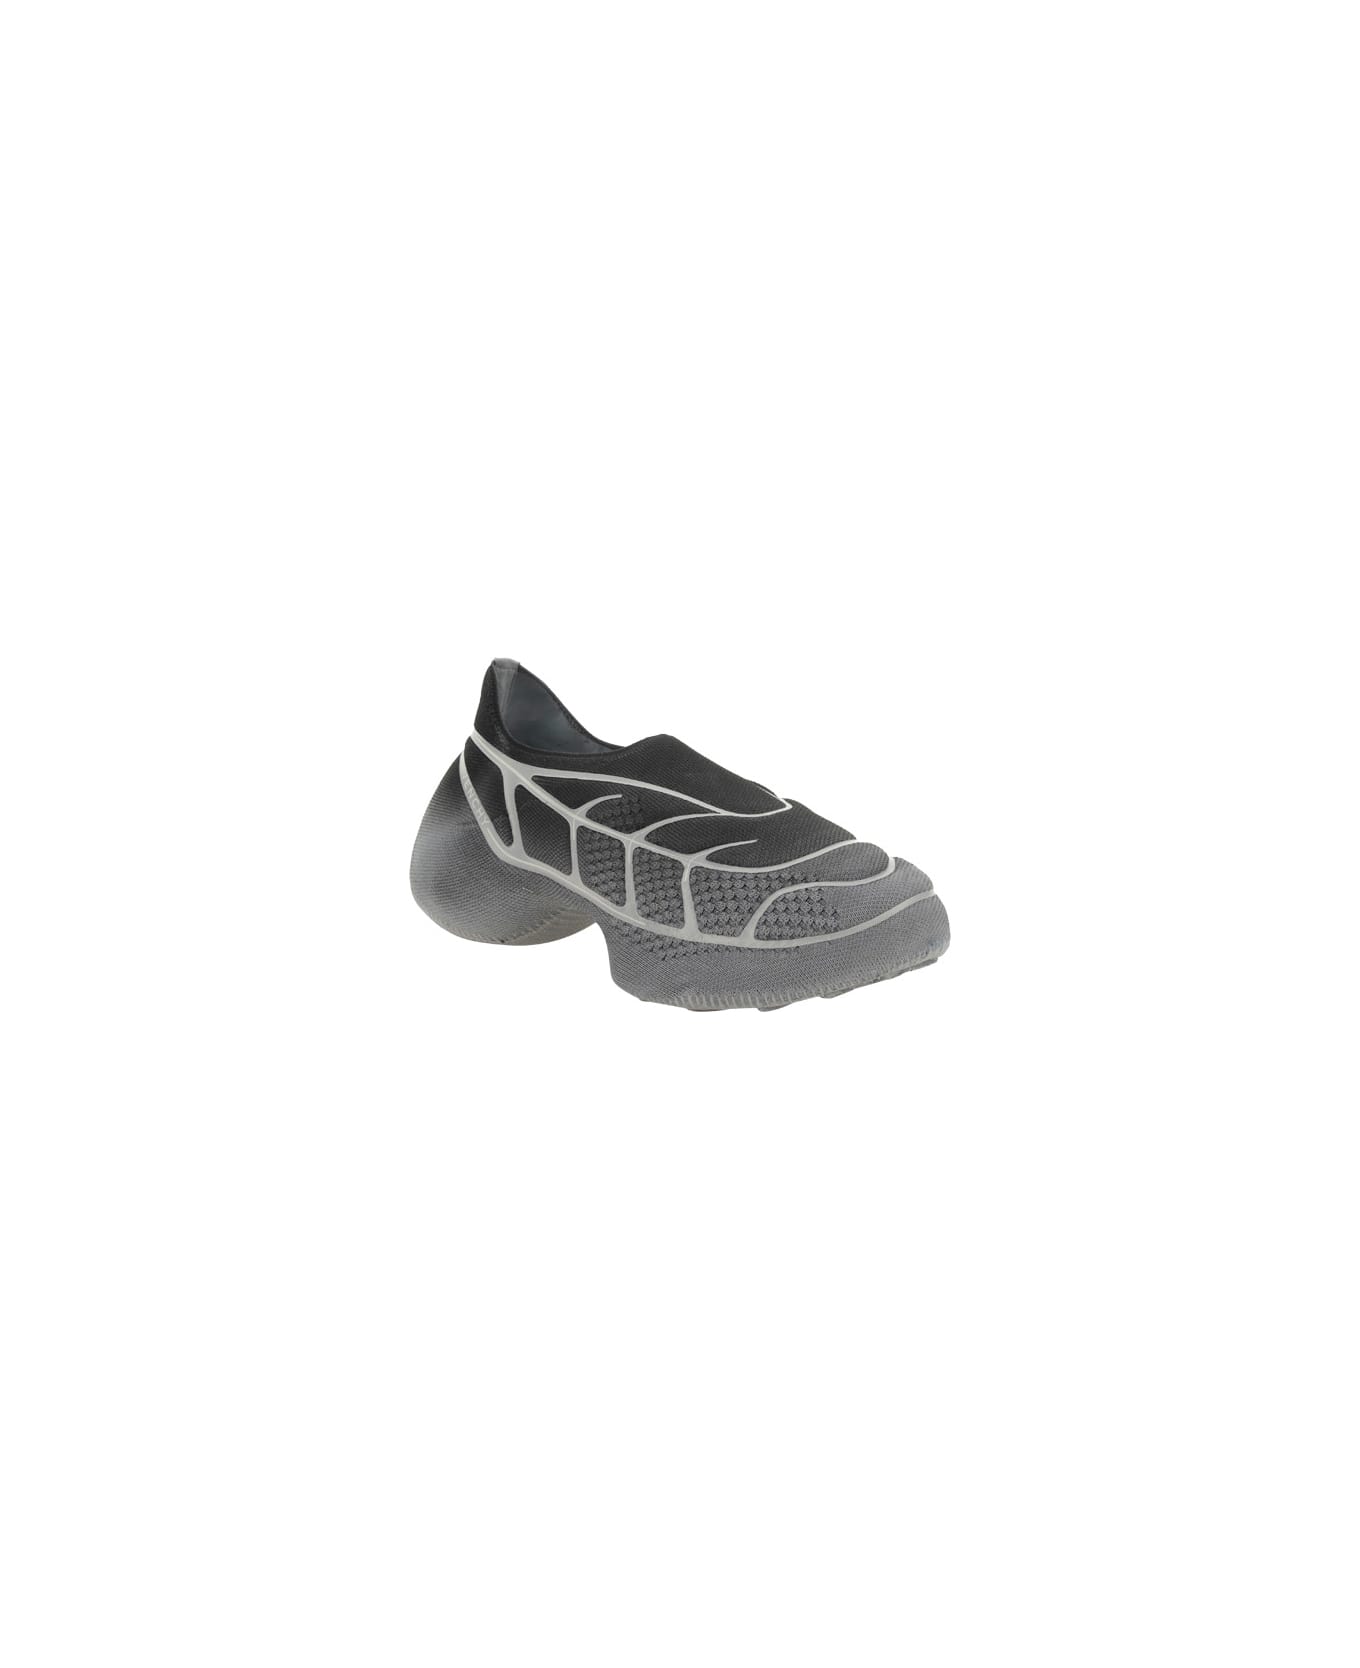 Givenchy Tk-360 Plus Sneakers - Black Grey